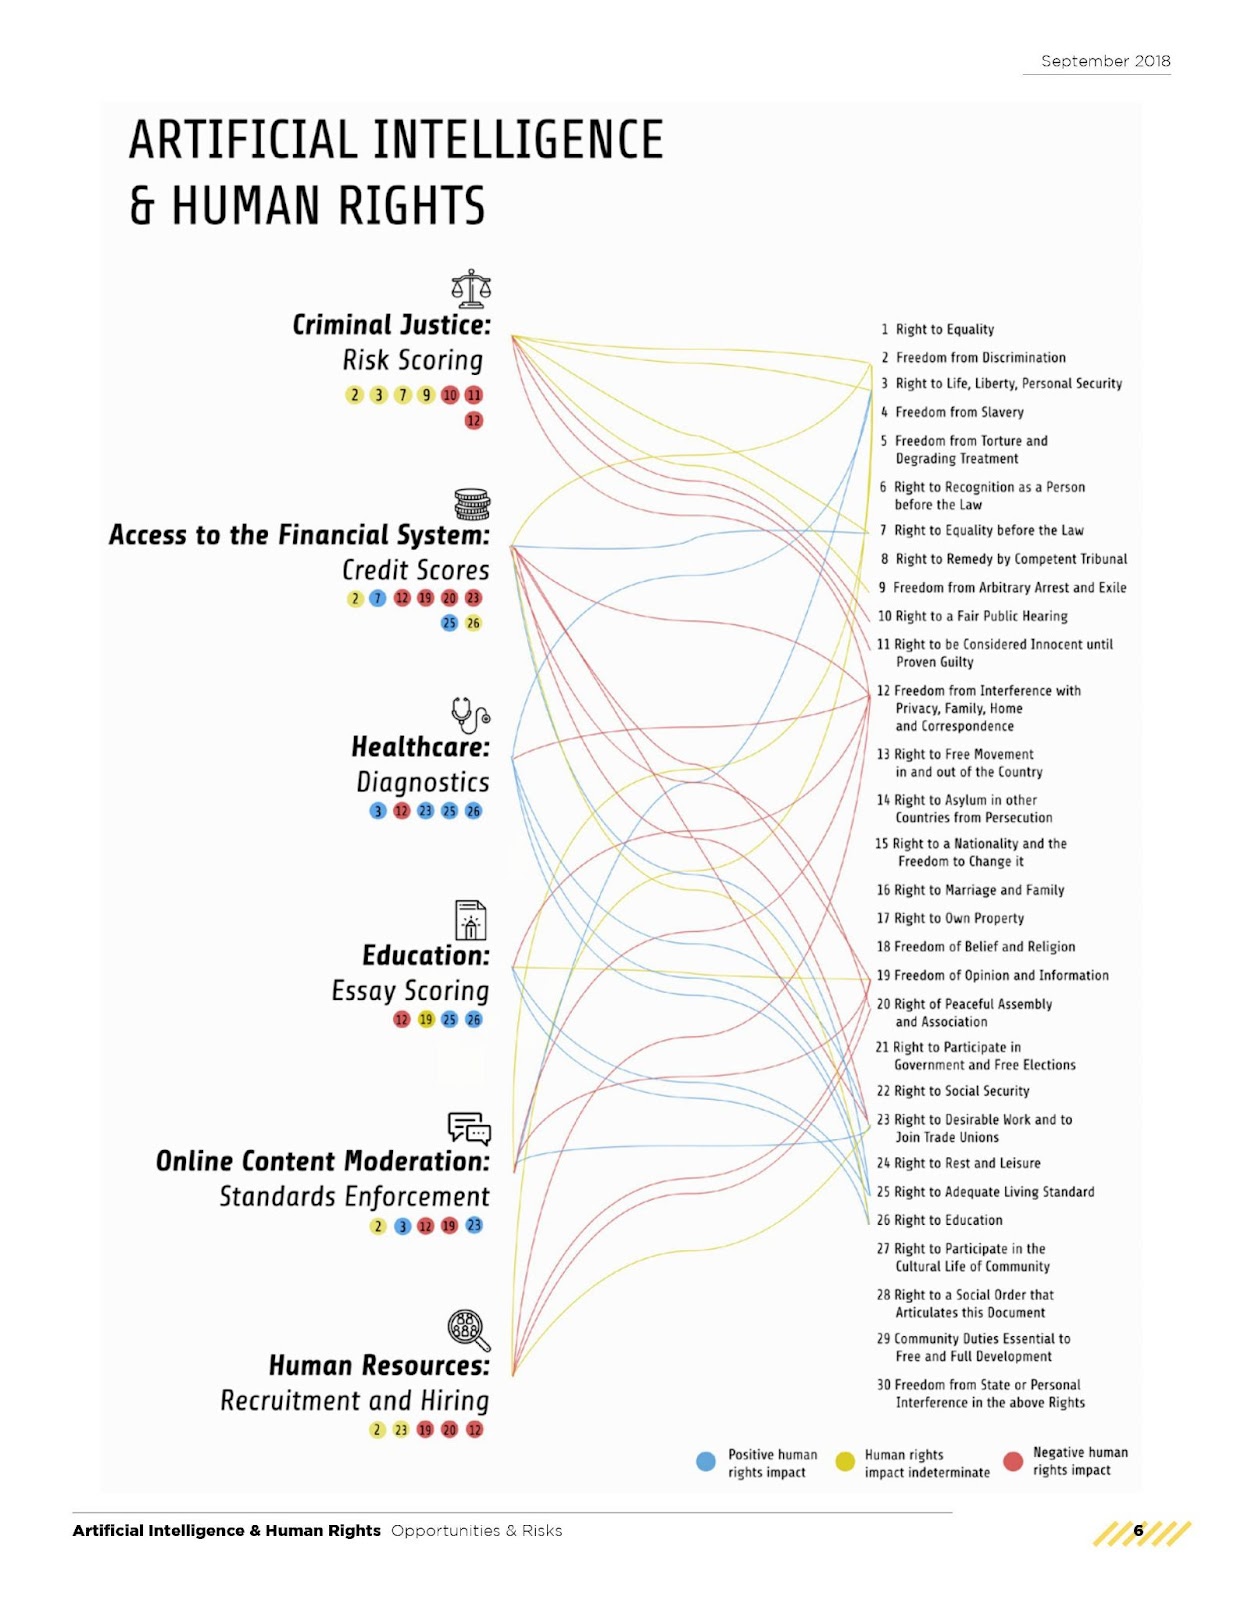 Artificial intelligence & human rights